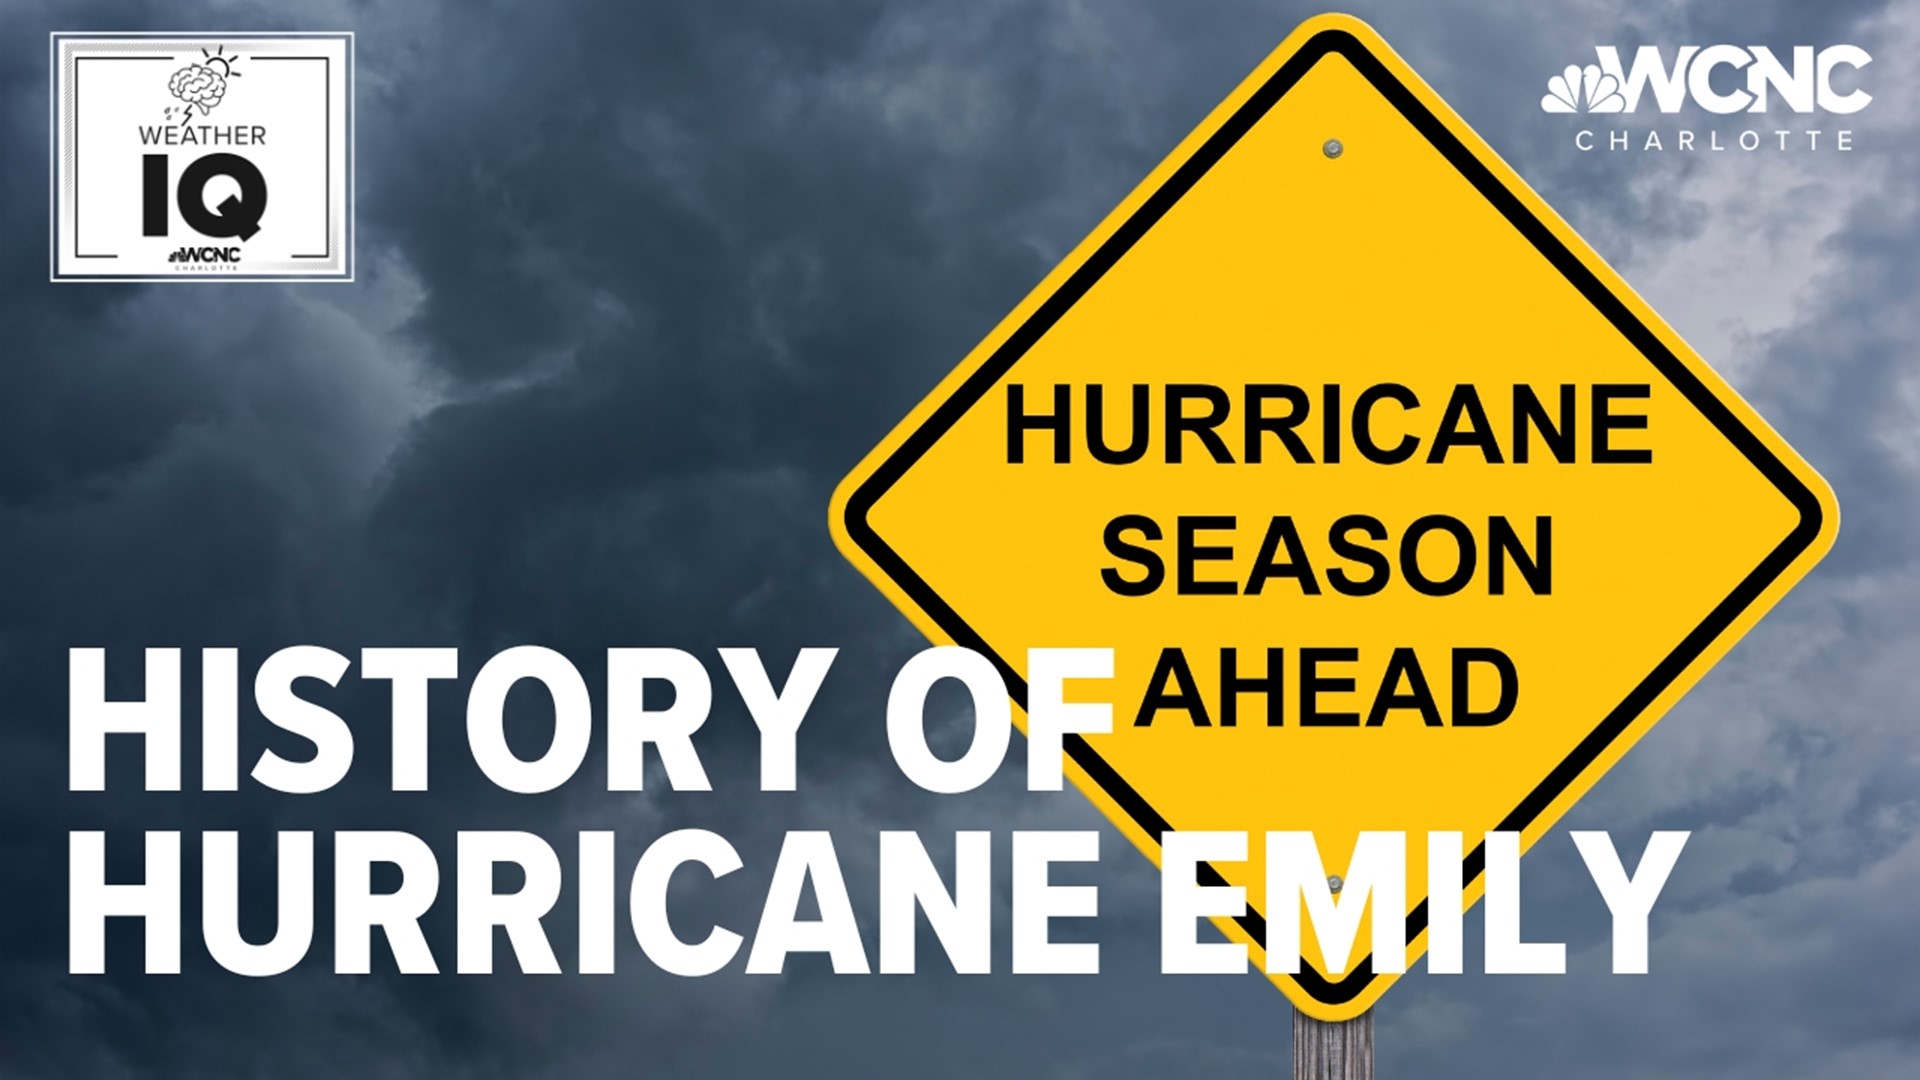 11 names of the most infamous hurricanes have been retired in the past. Hurricane Emily has caused large destruction six times, so why hasn't that name been retired?